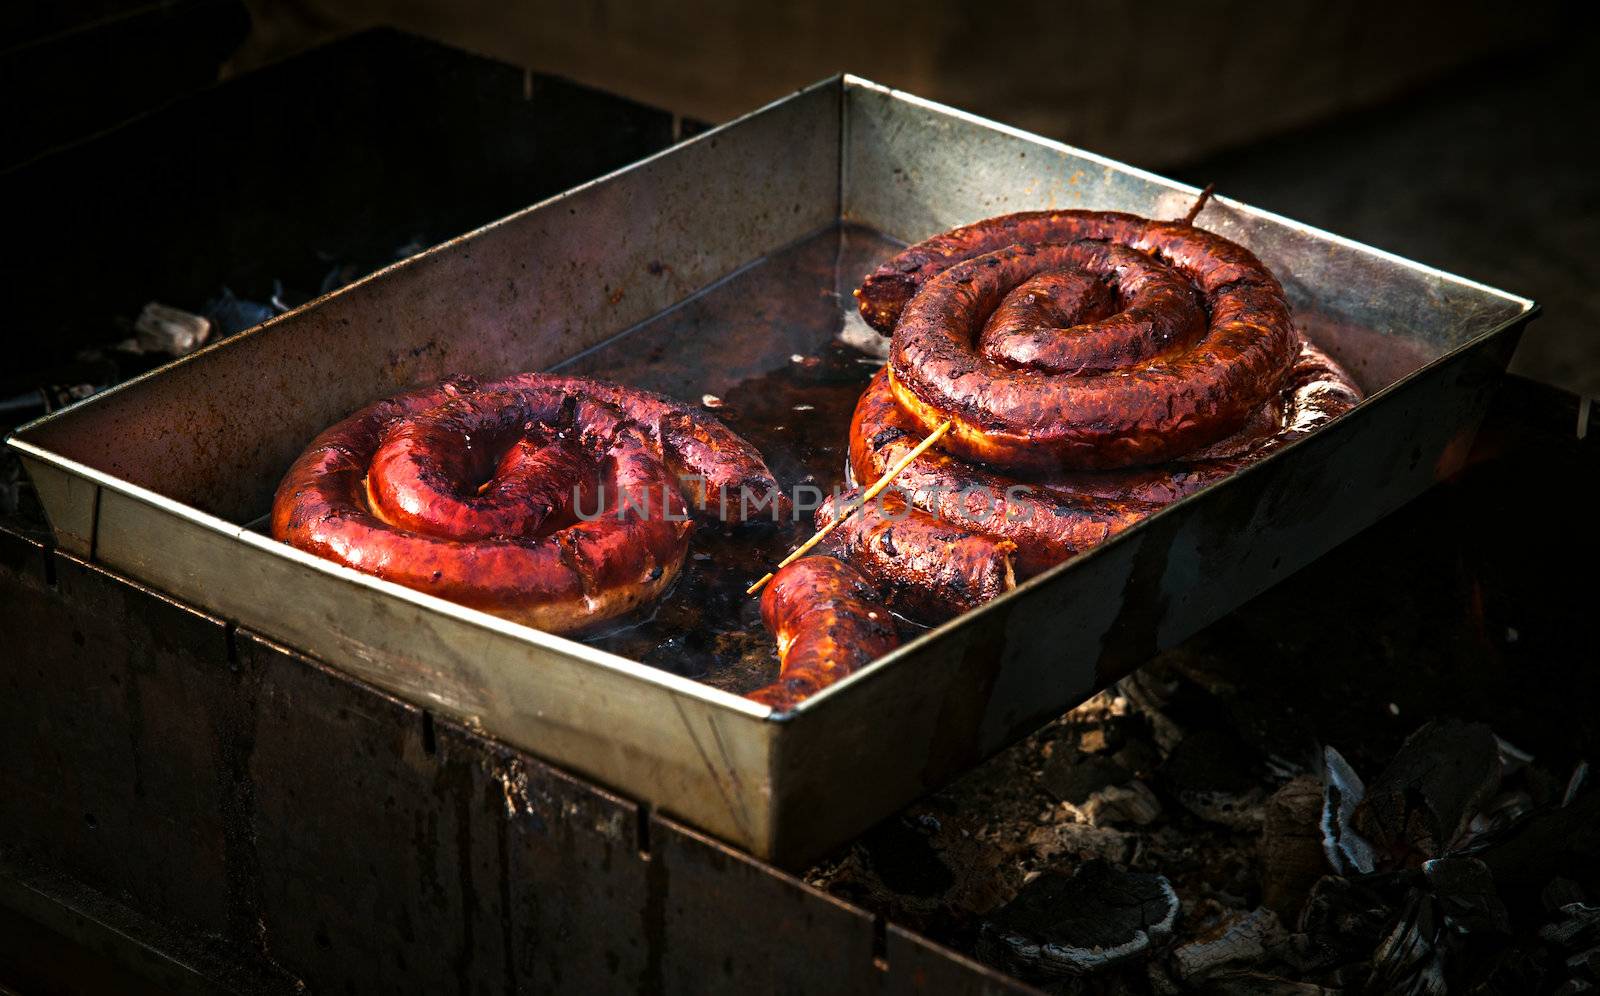 Appetizing and delicious pork sausage fried in oil